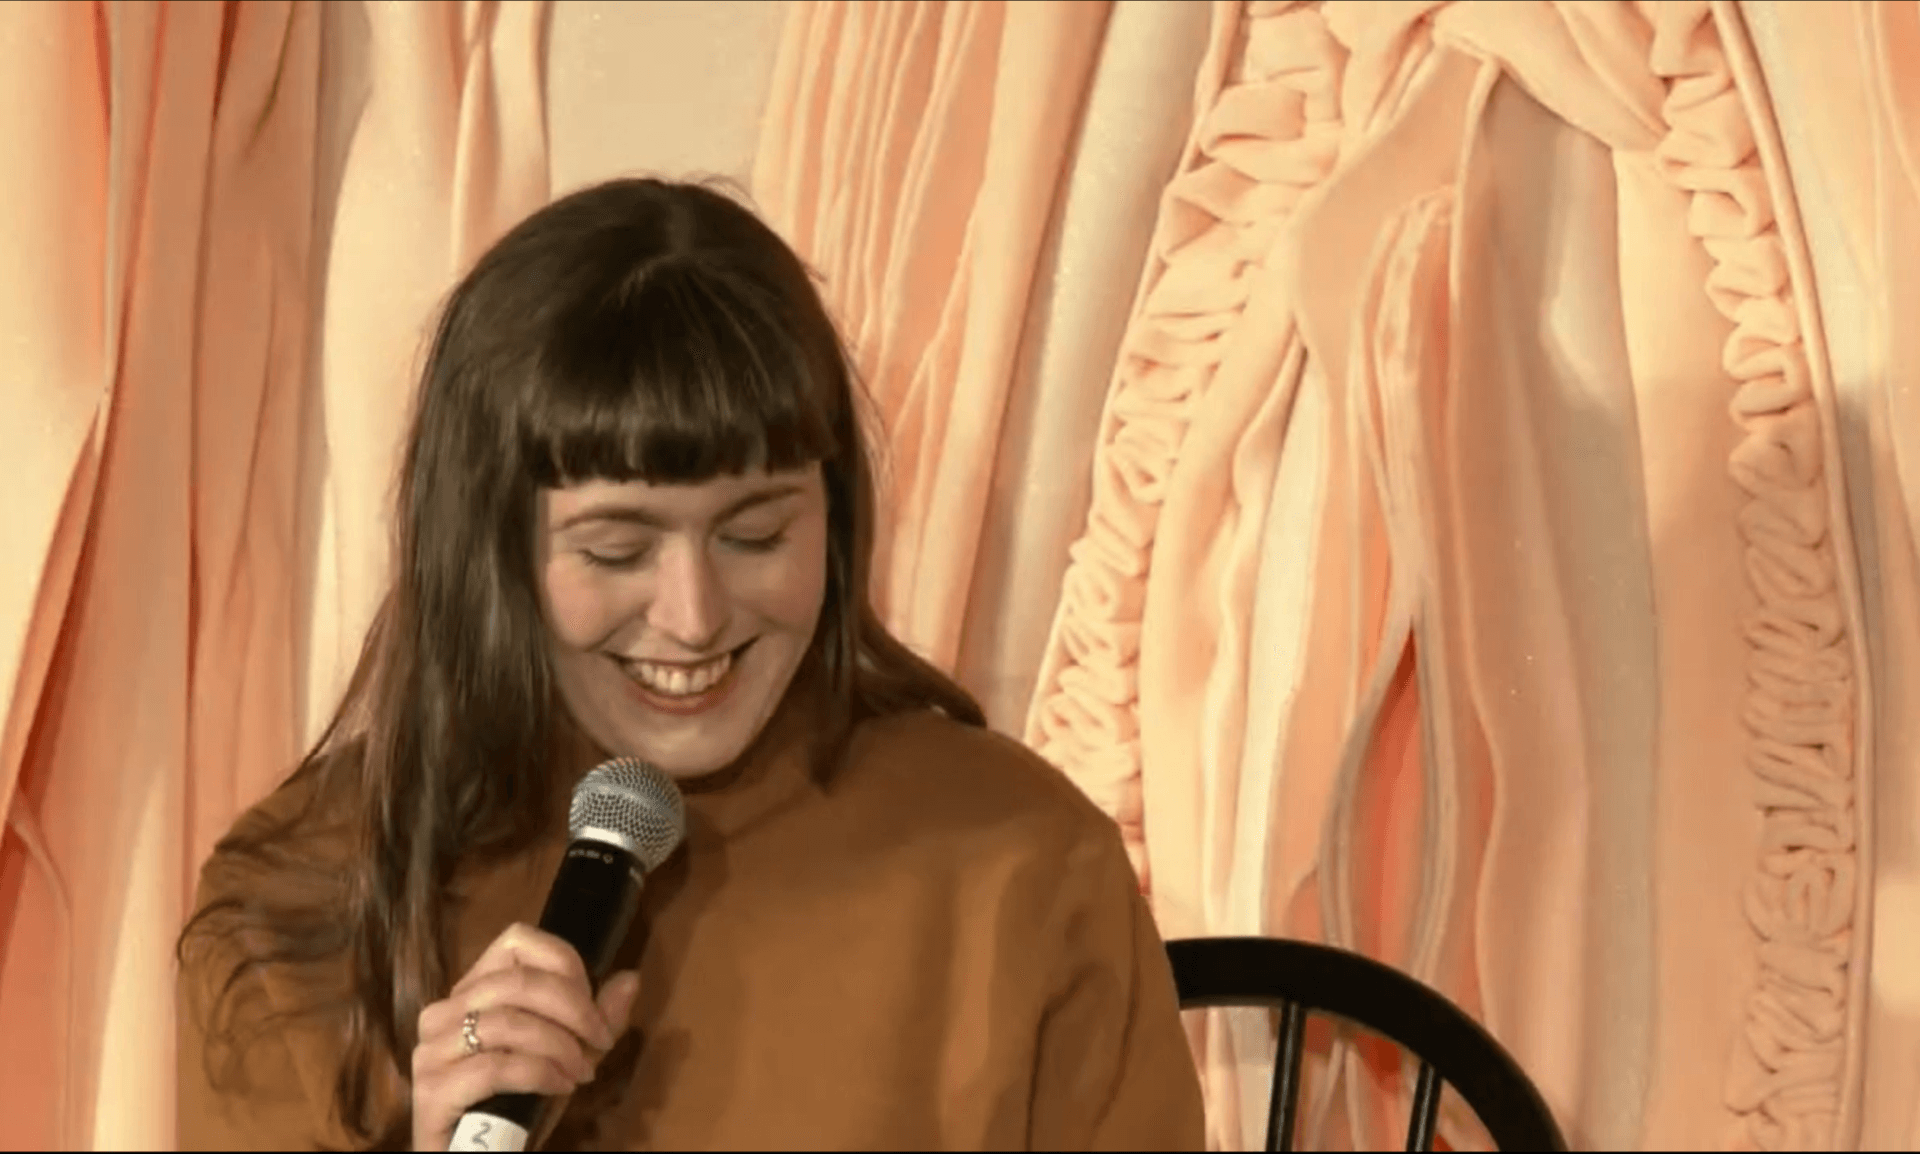 Photo of artist Siobhan McLaughlin smiling with a microphone